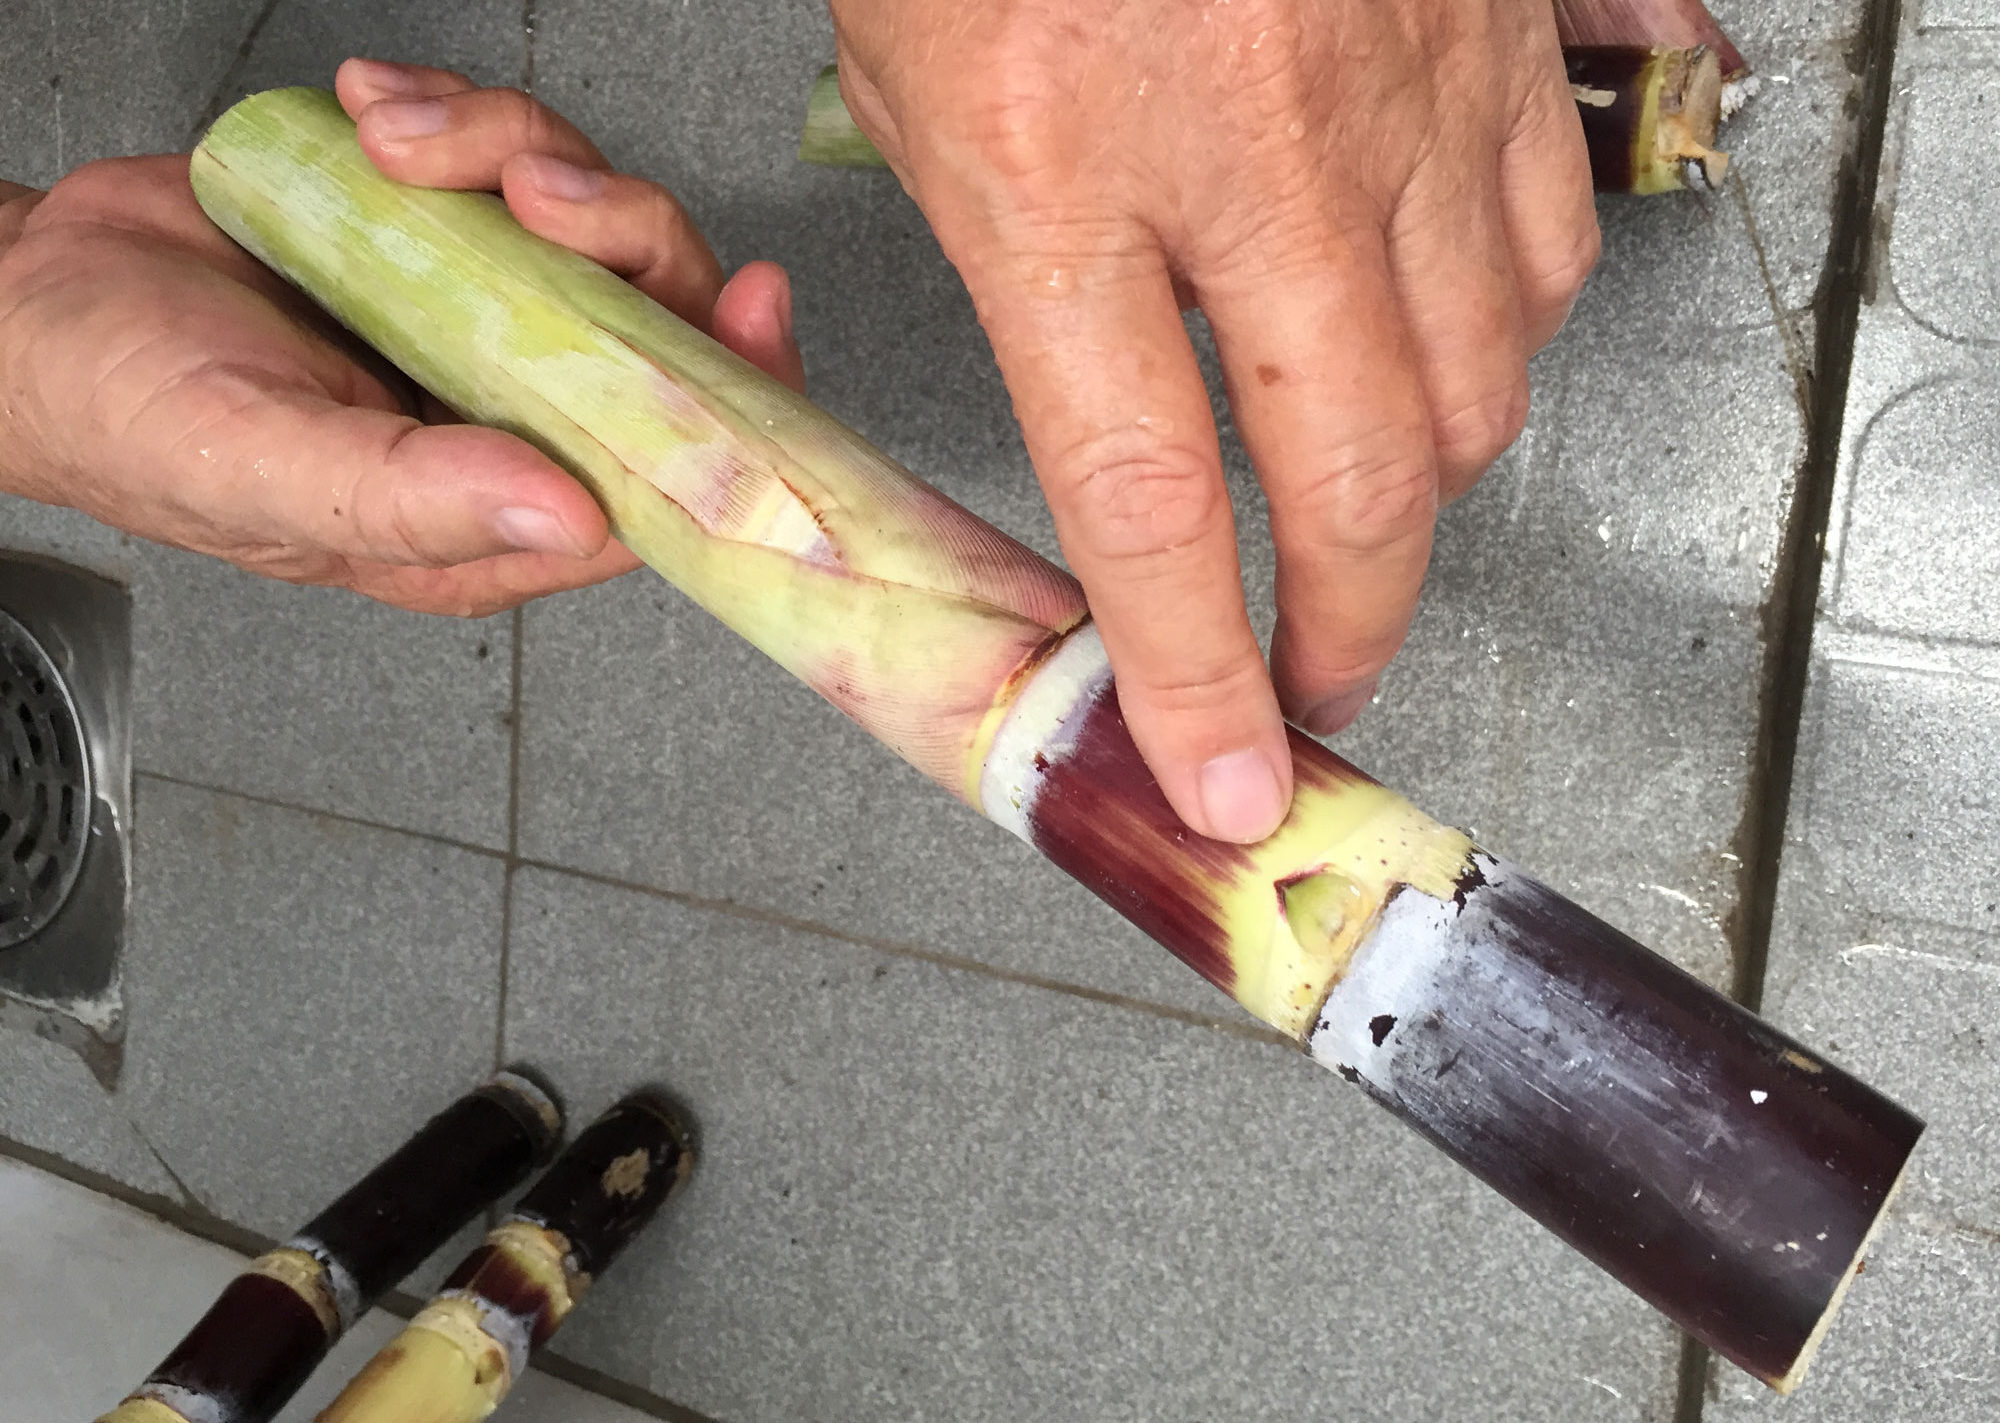 Photograph of a piece of a sugarcane stem with a bud. The photo shows a piece of stem held by a man in one hand, with the other hand pointing at a large bud.